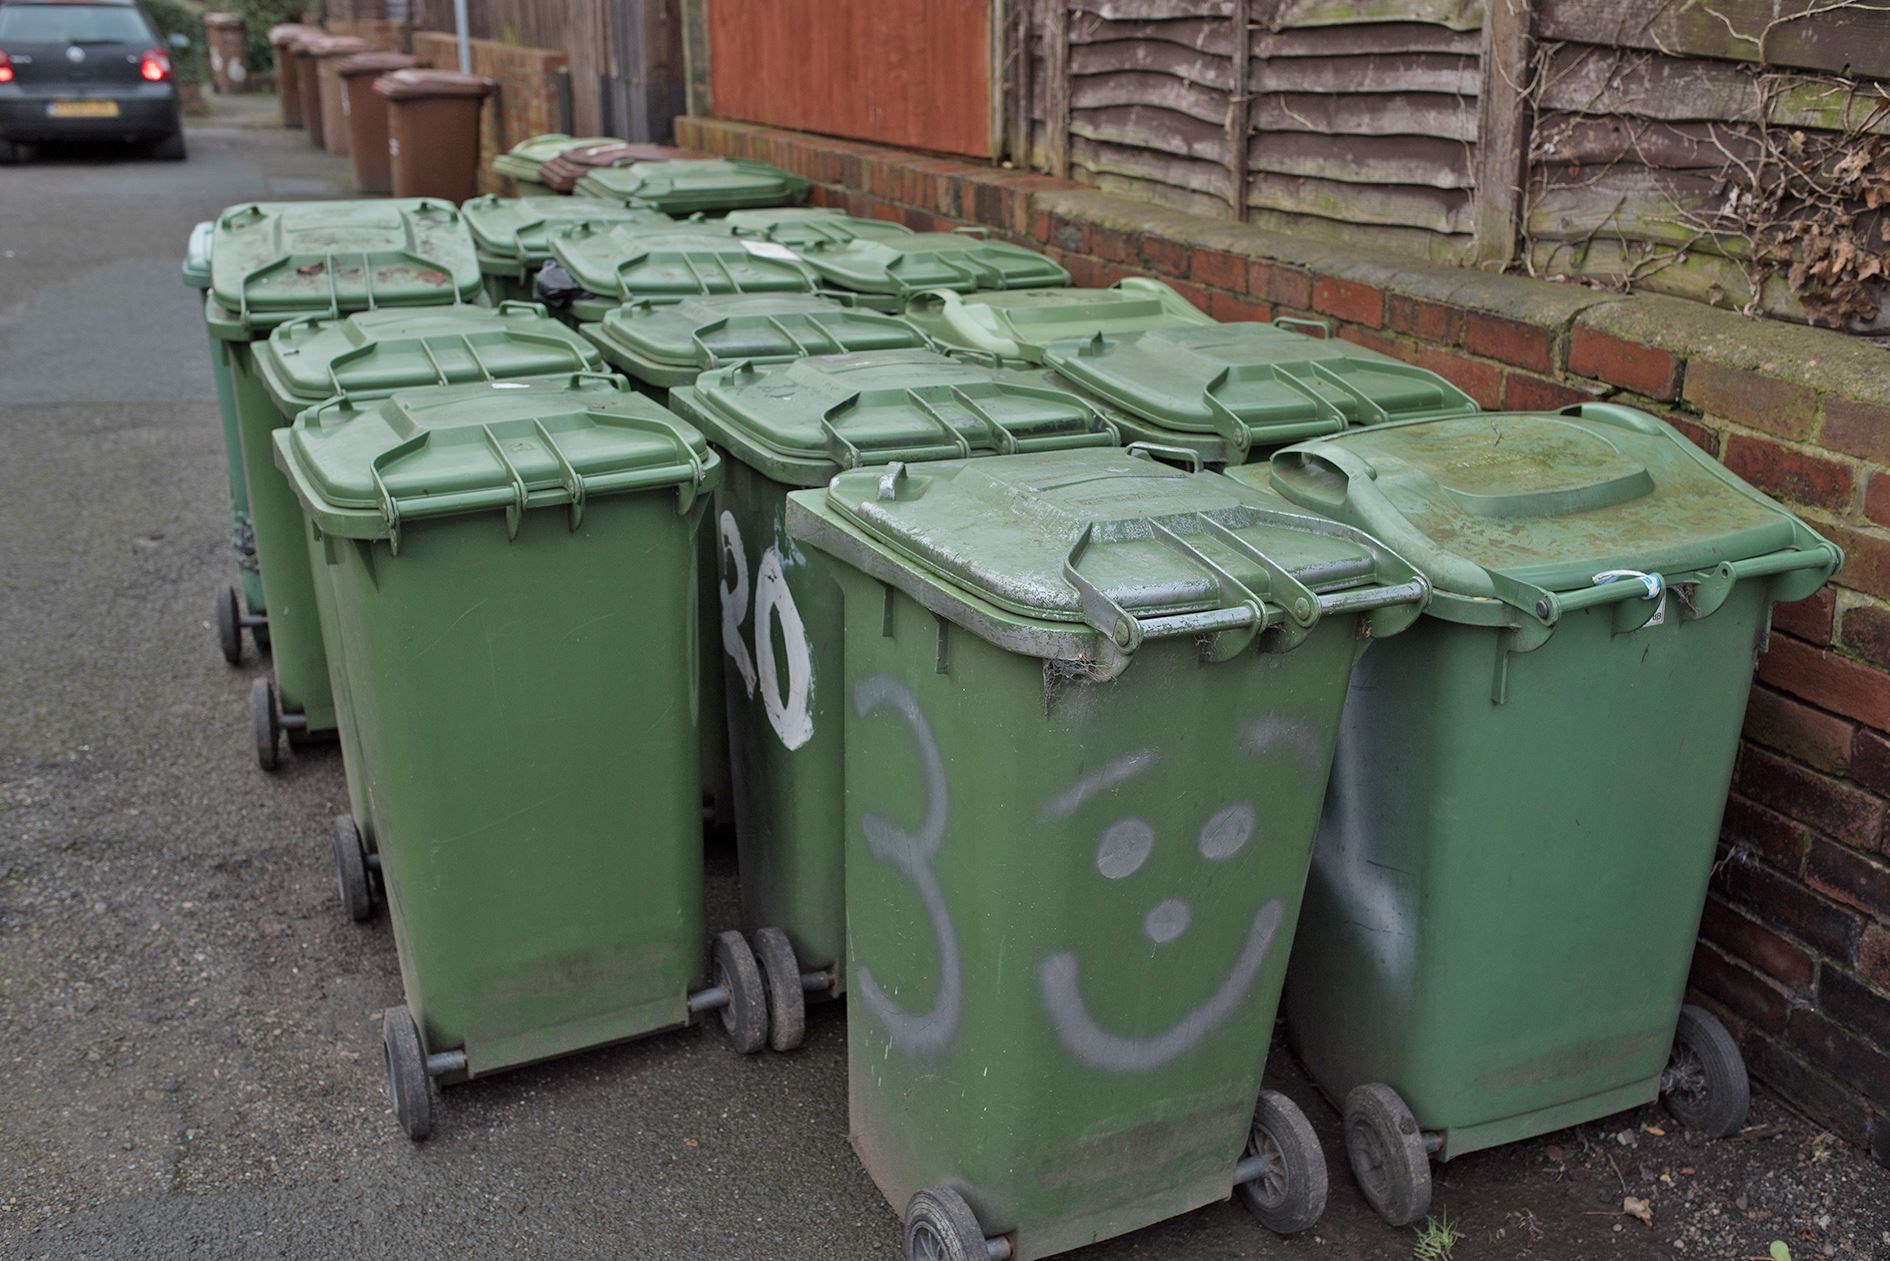 Highland Council are looking at reducing the size of the Green wheelie bin from 240 to 140 litres.